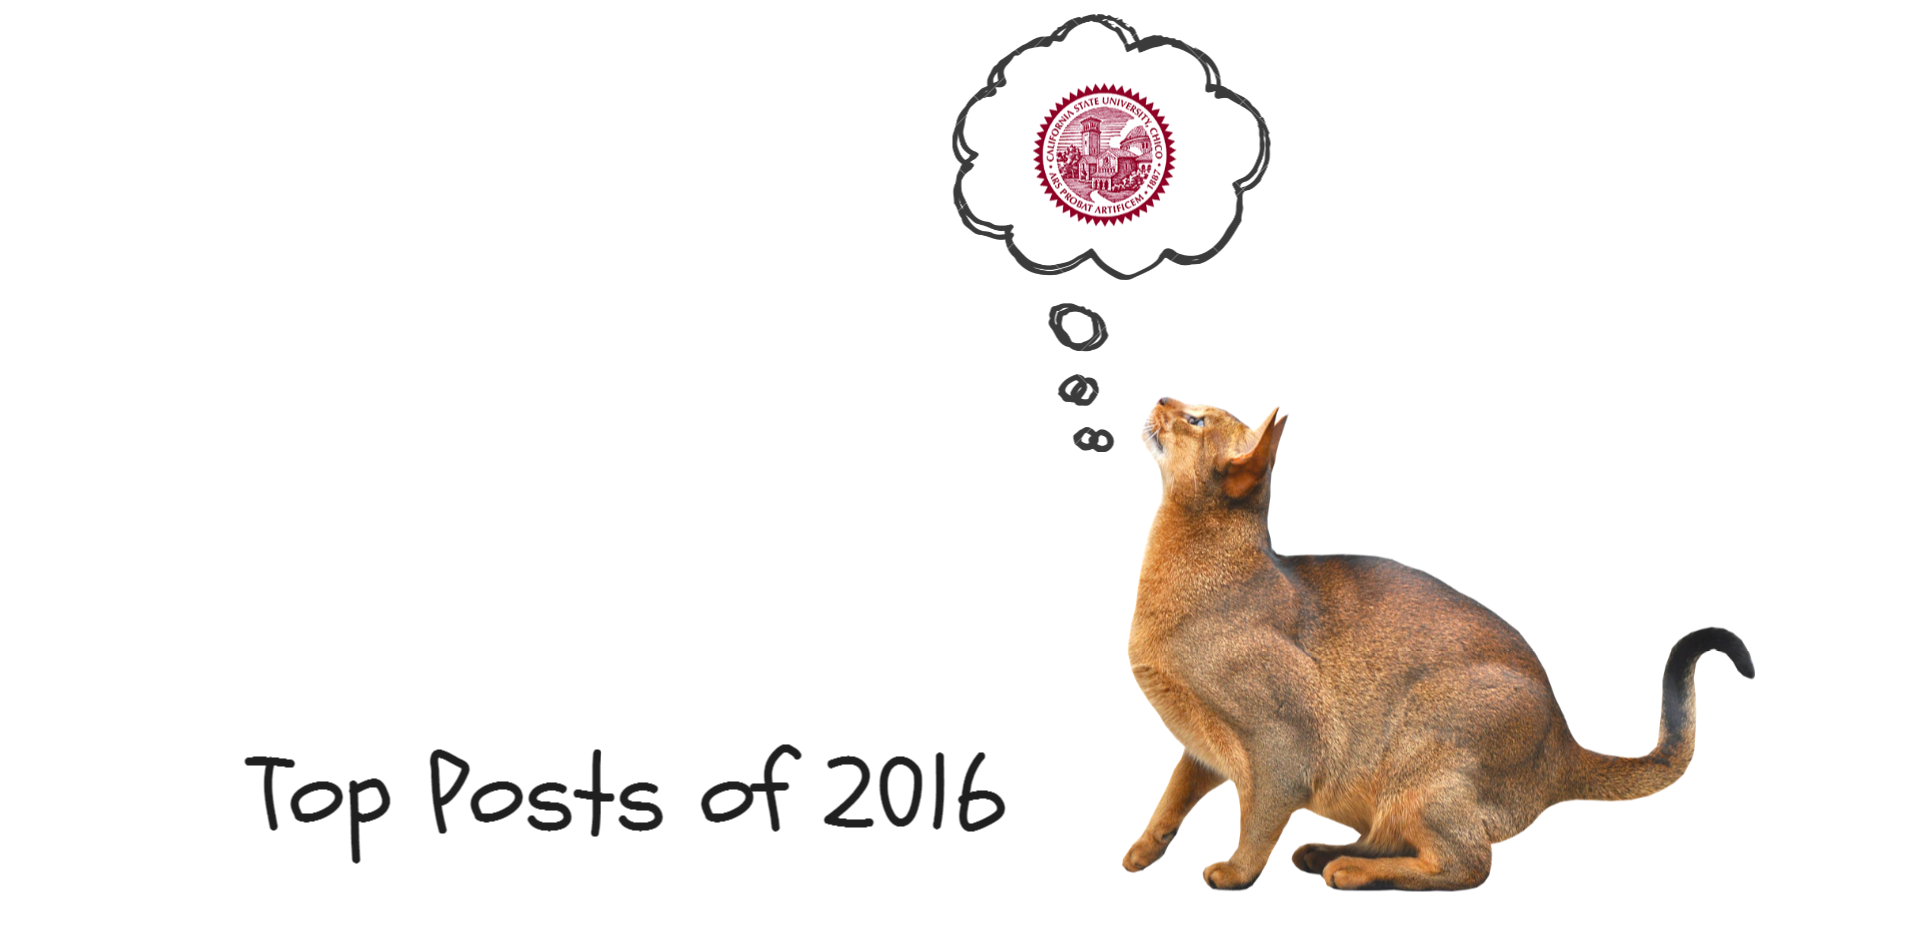 A title graphic stating "Top Posts of 2016."